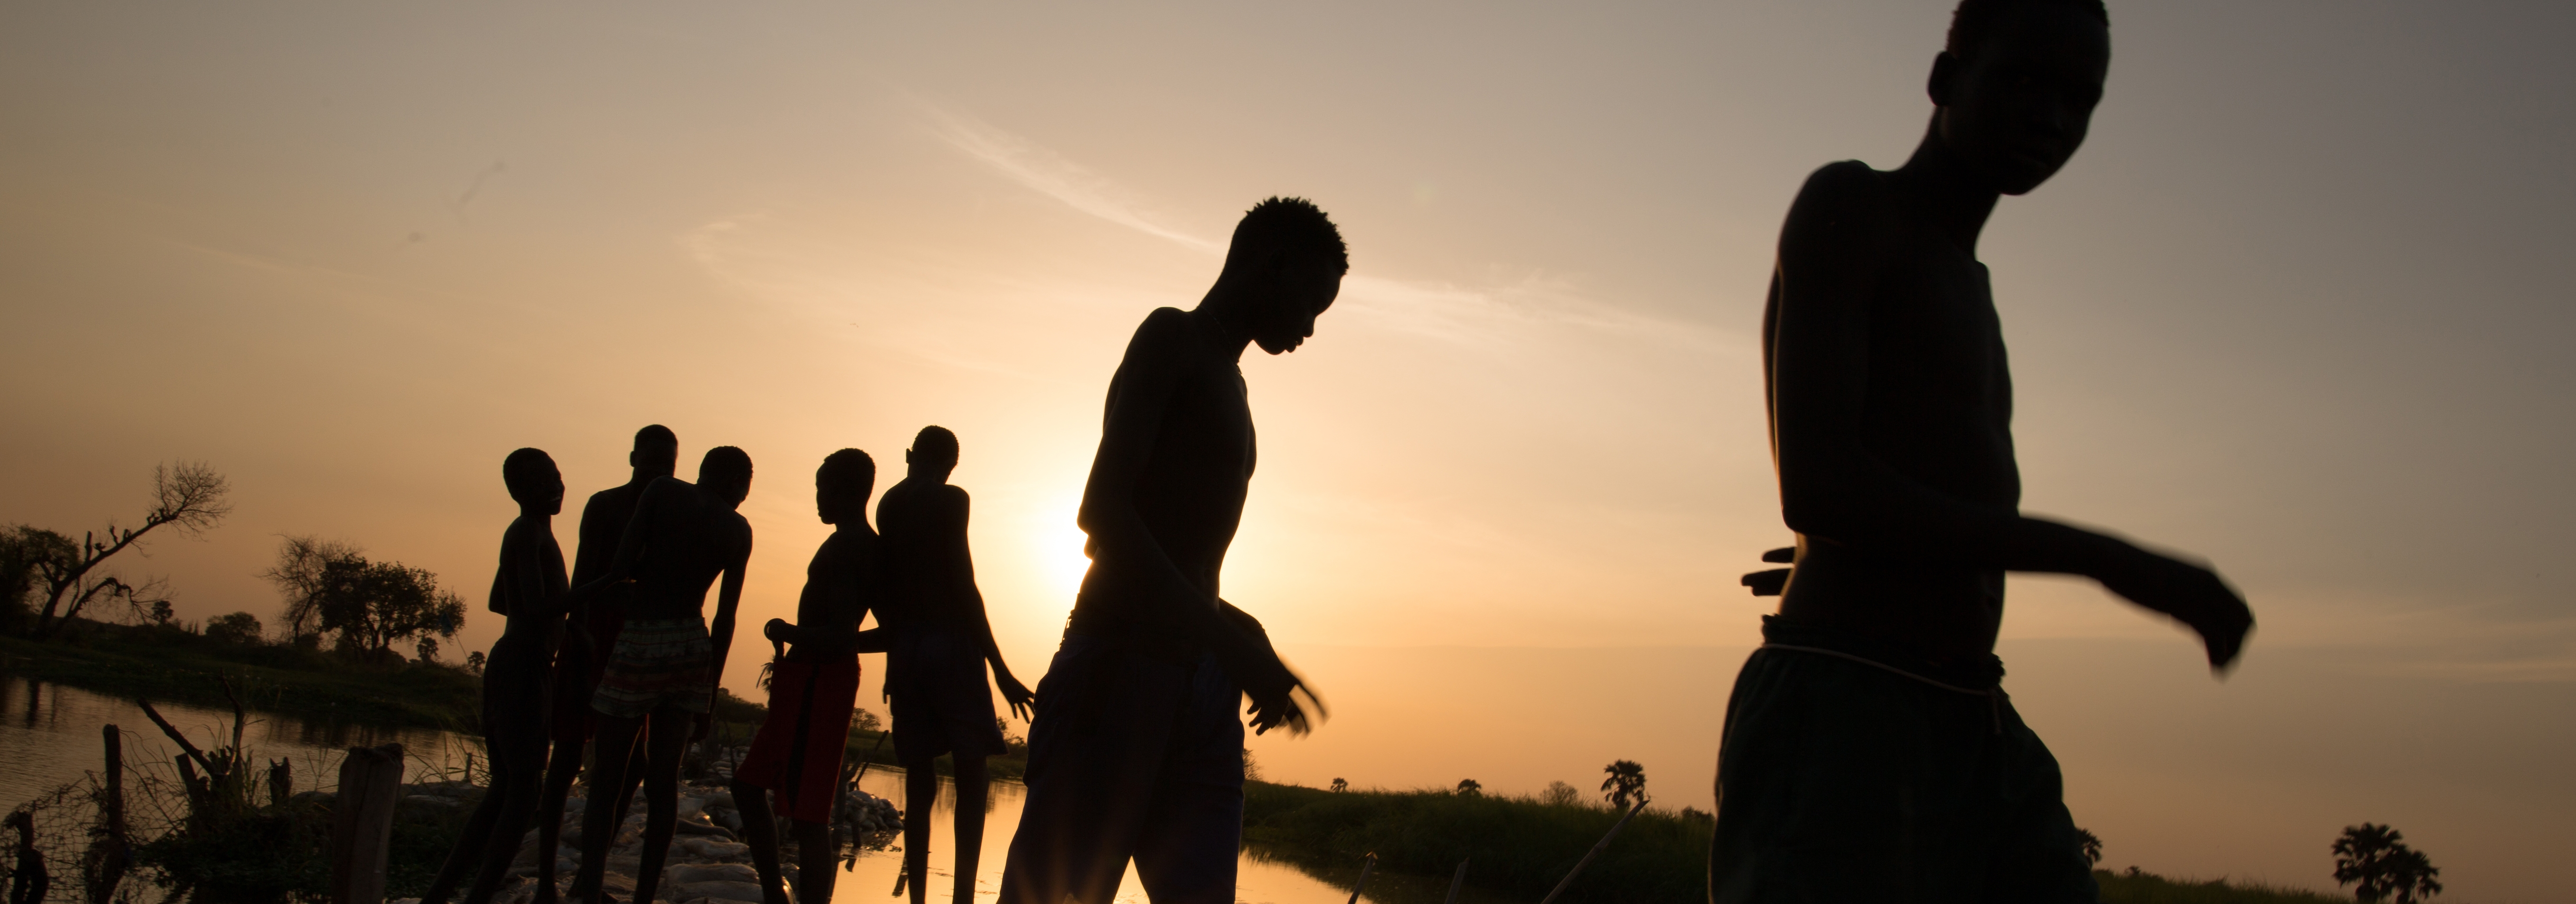 Youth that have been vital in building dikes in Bor, South Sudan following heavy flooding return home after a long day repairing and building dikes